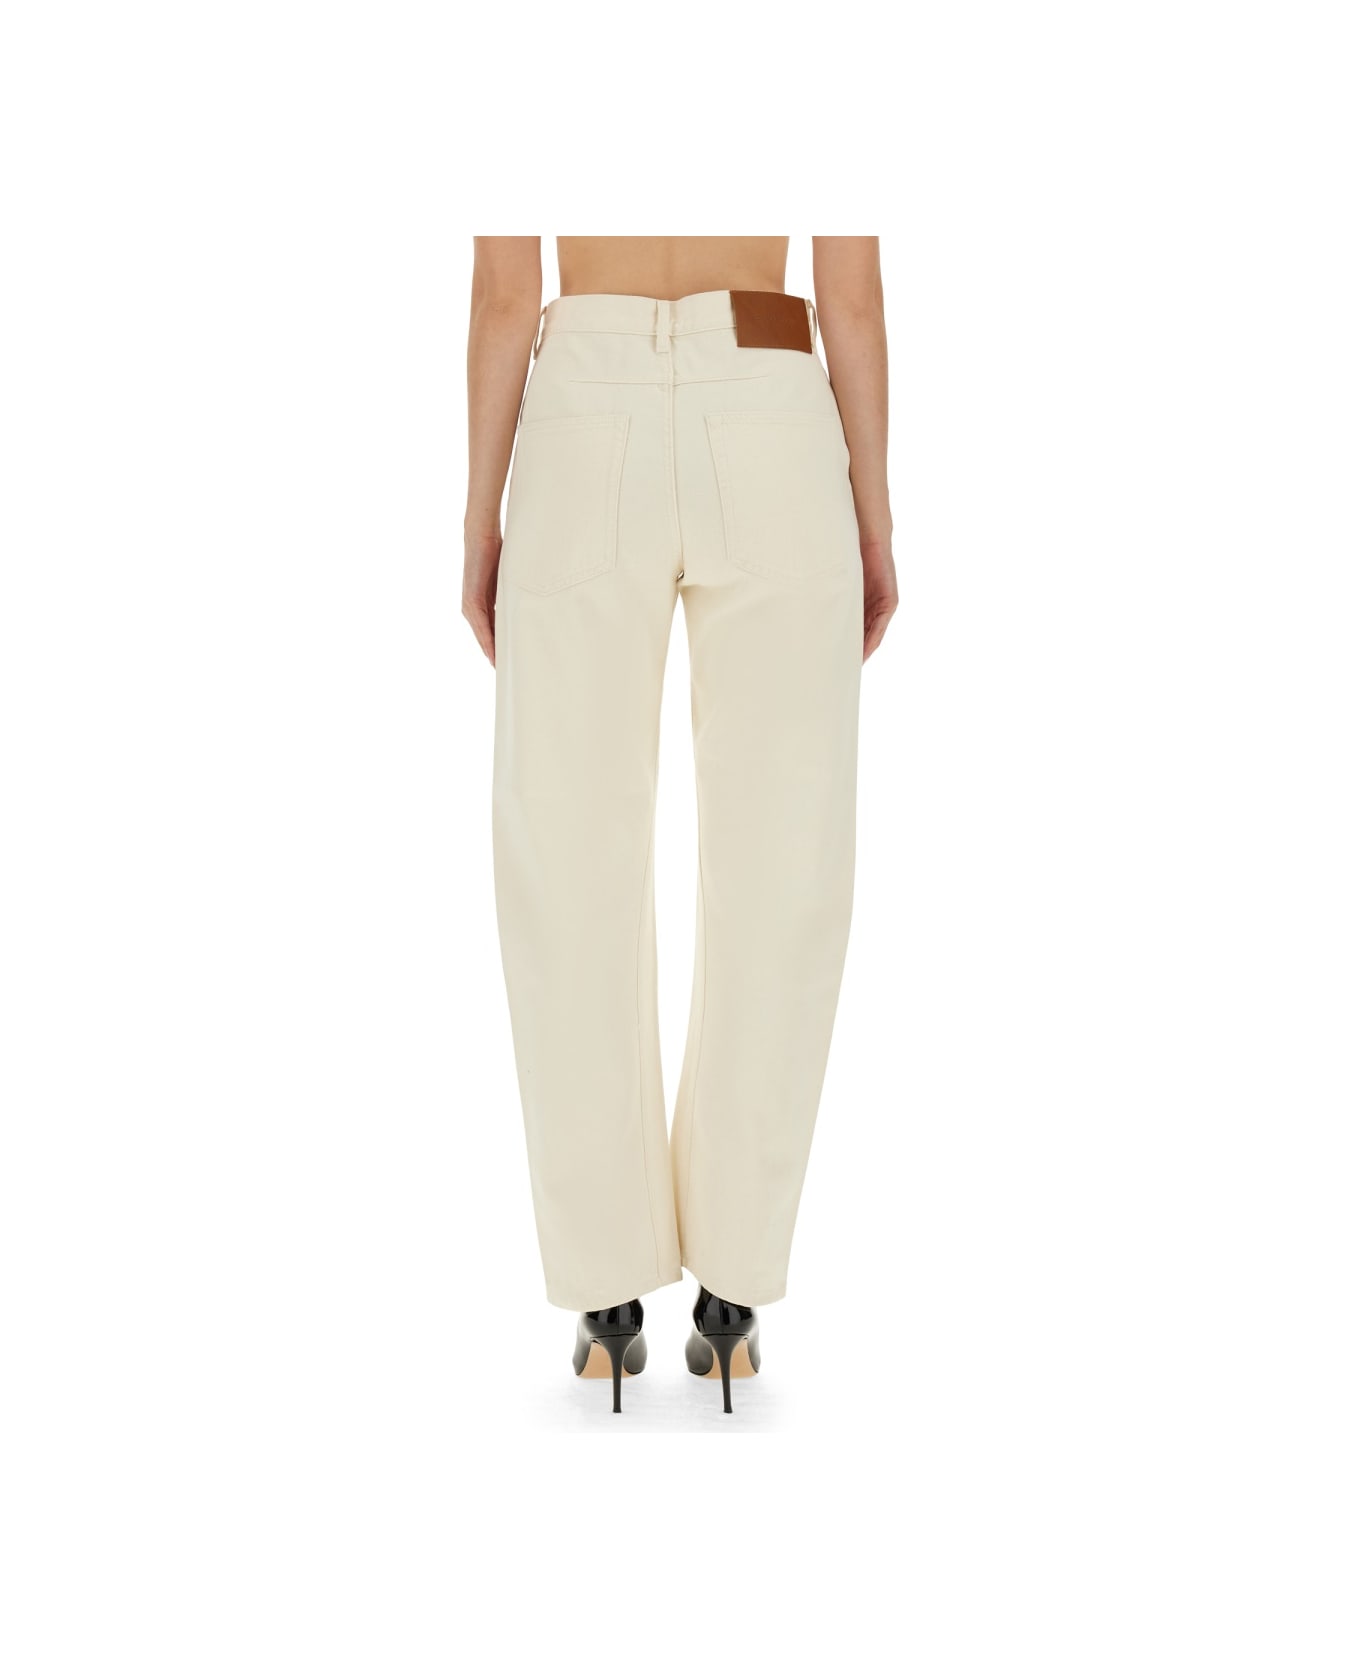 Victoria Beckham Relaxed Fit Jeans - Beige